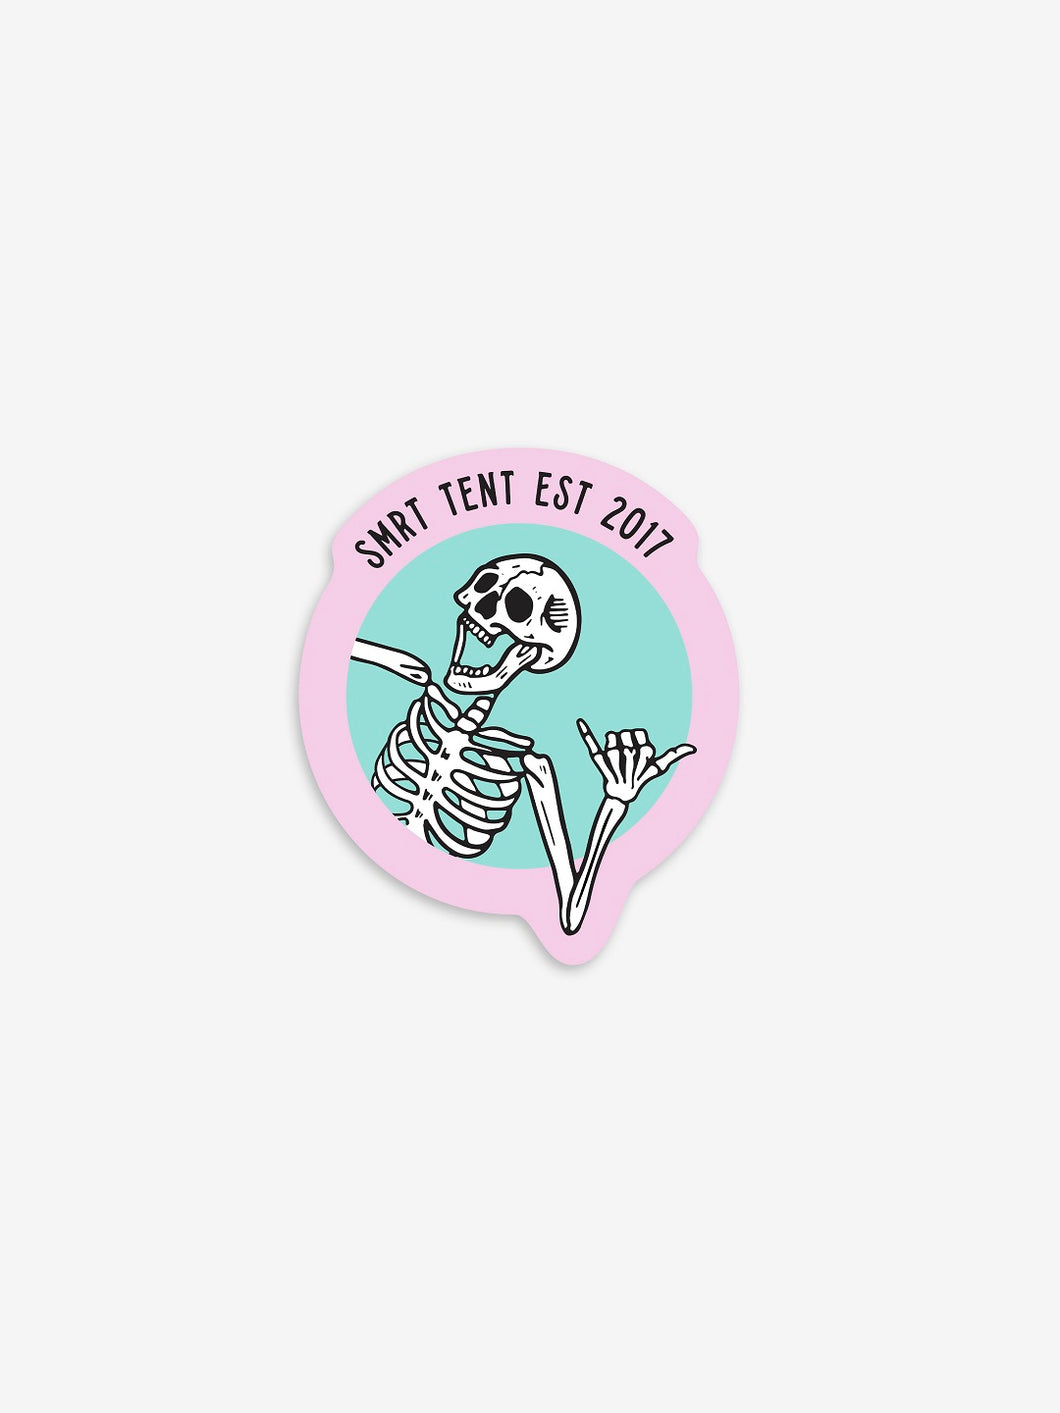 Pictured is a laughing white skeleton in-frame from the ribs up. All fingers of the left hand are bent except for the thumb and pinky finger. The other hand and arm are out of frame. The backdrop is teal and outlined thickly with another frame in pink where it says SMRT Tent Est 2017 in black text. Part of the left arm breaks out of the teal circle frame and overlaps with the pink frame. Perfect to put on your truck's dash or roof top tent! Available for sale by SMRT Tent in Edmonton, Canada.